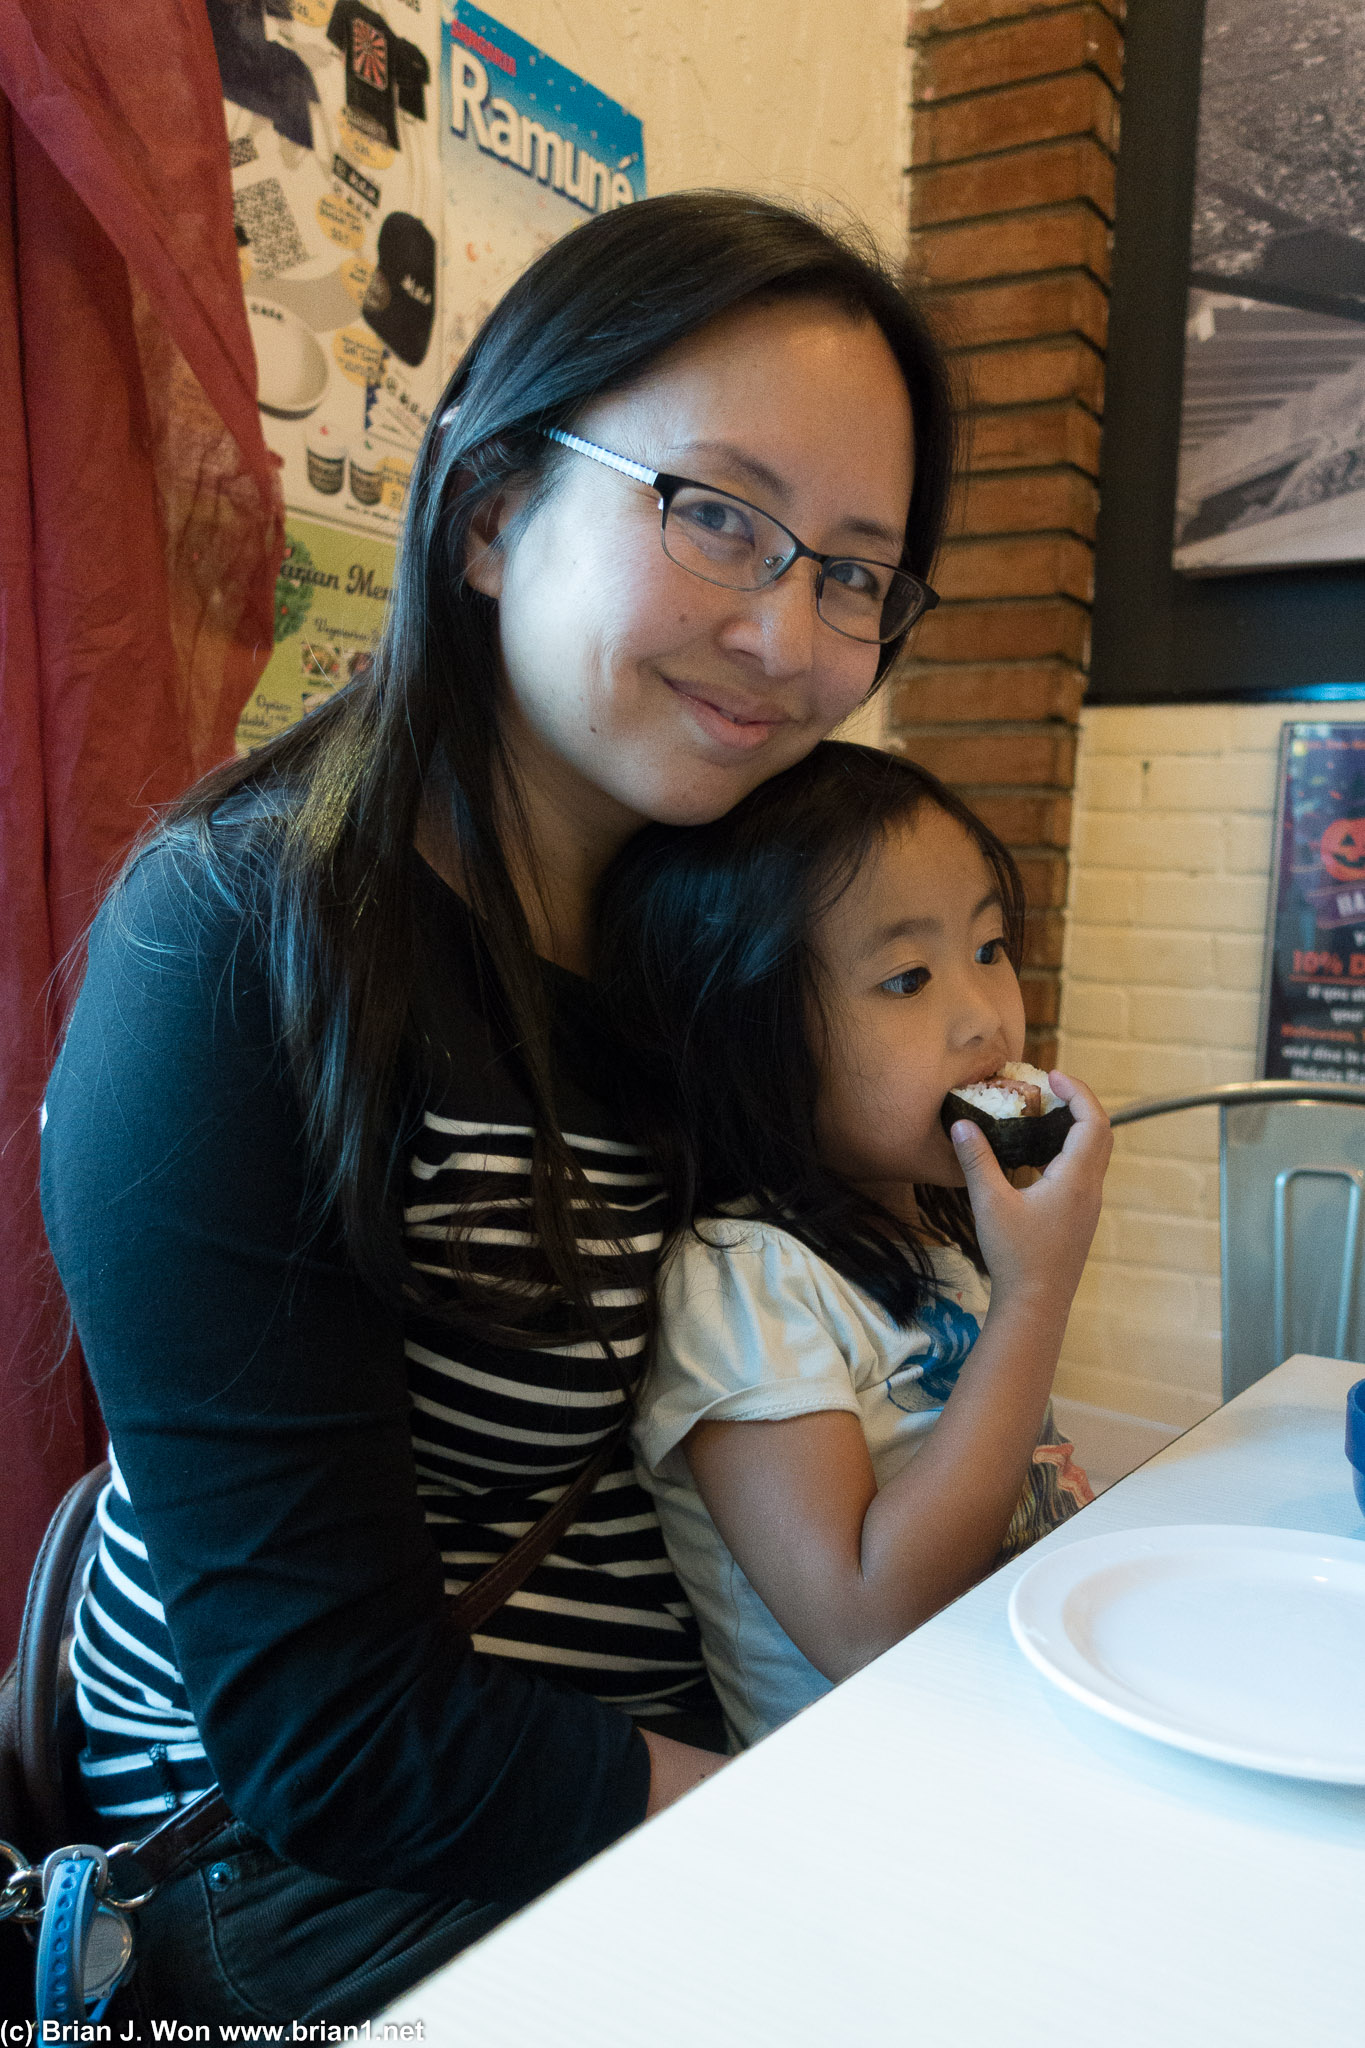 Mother and daughter. Or is it mother and spam musubi-eating child?